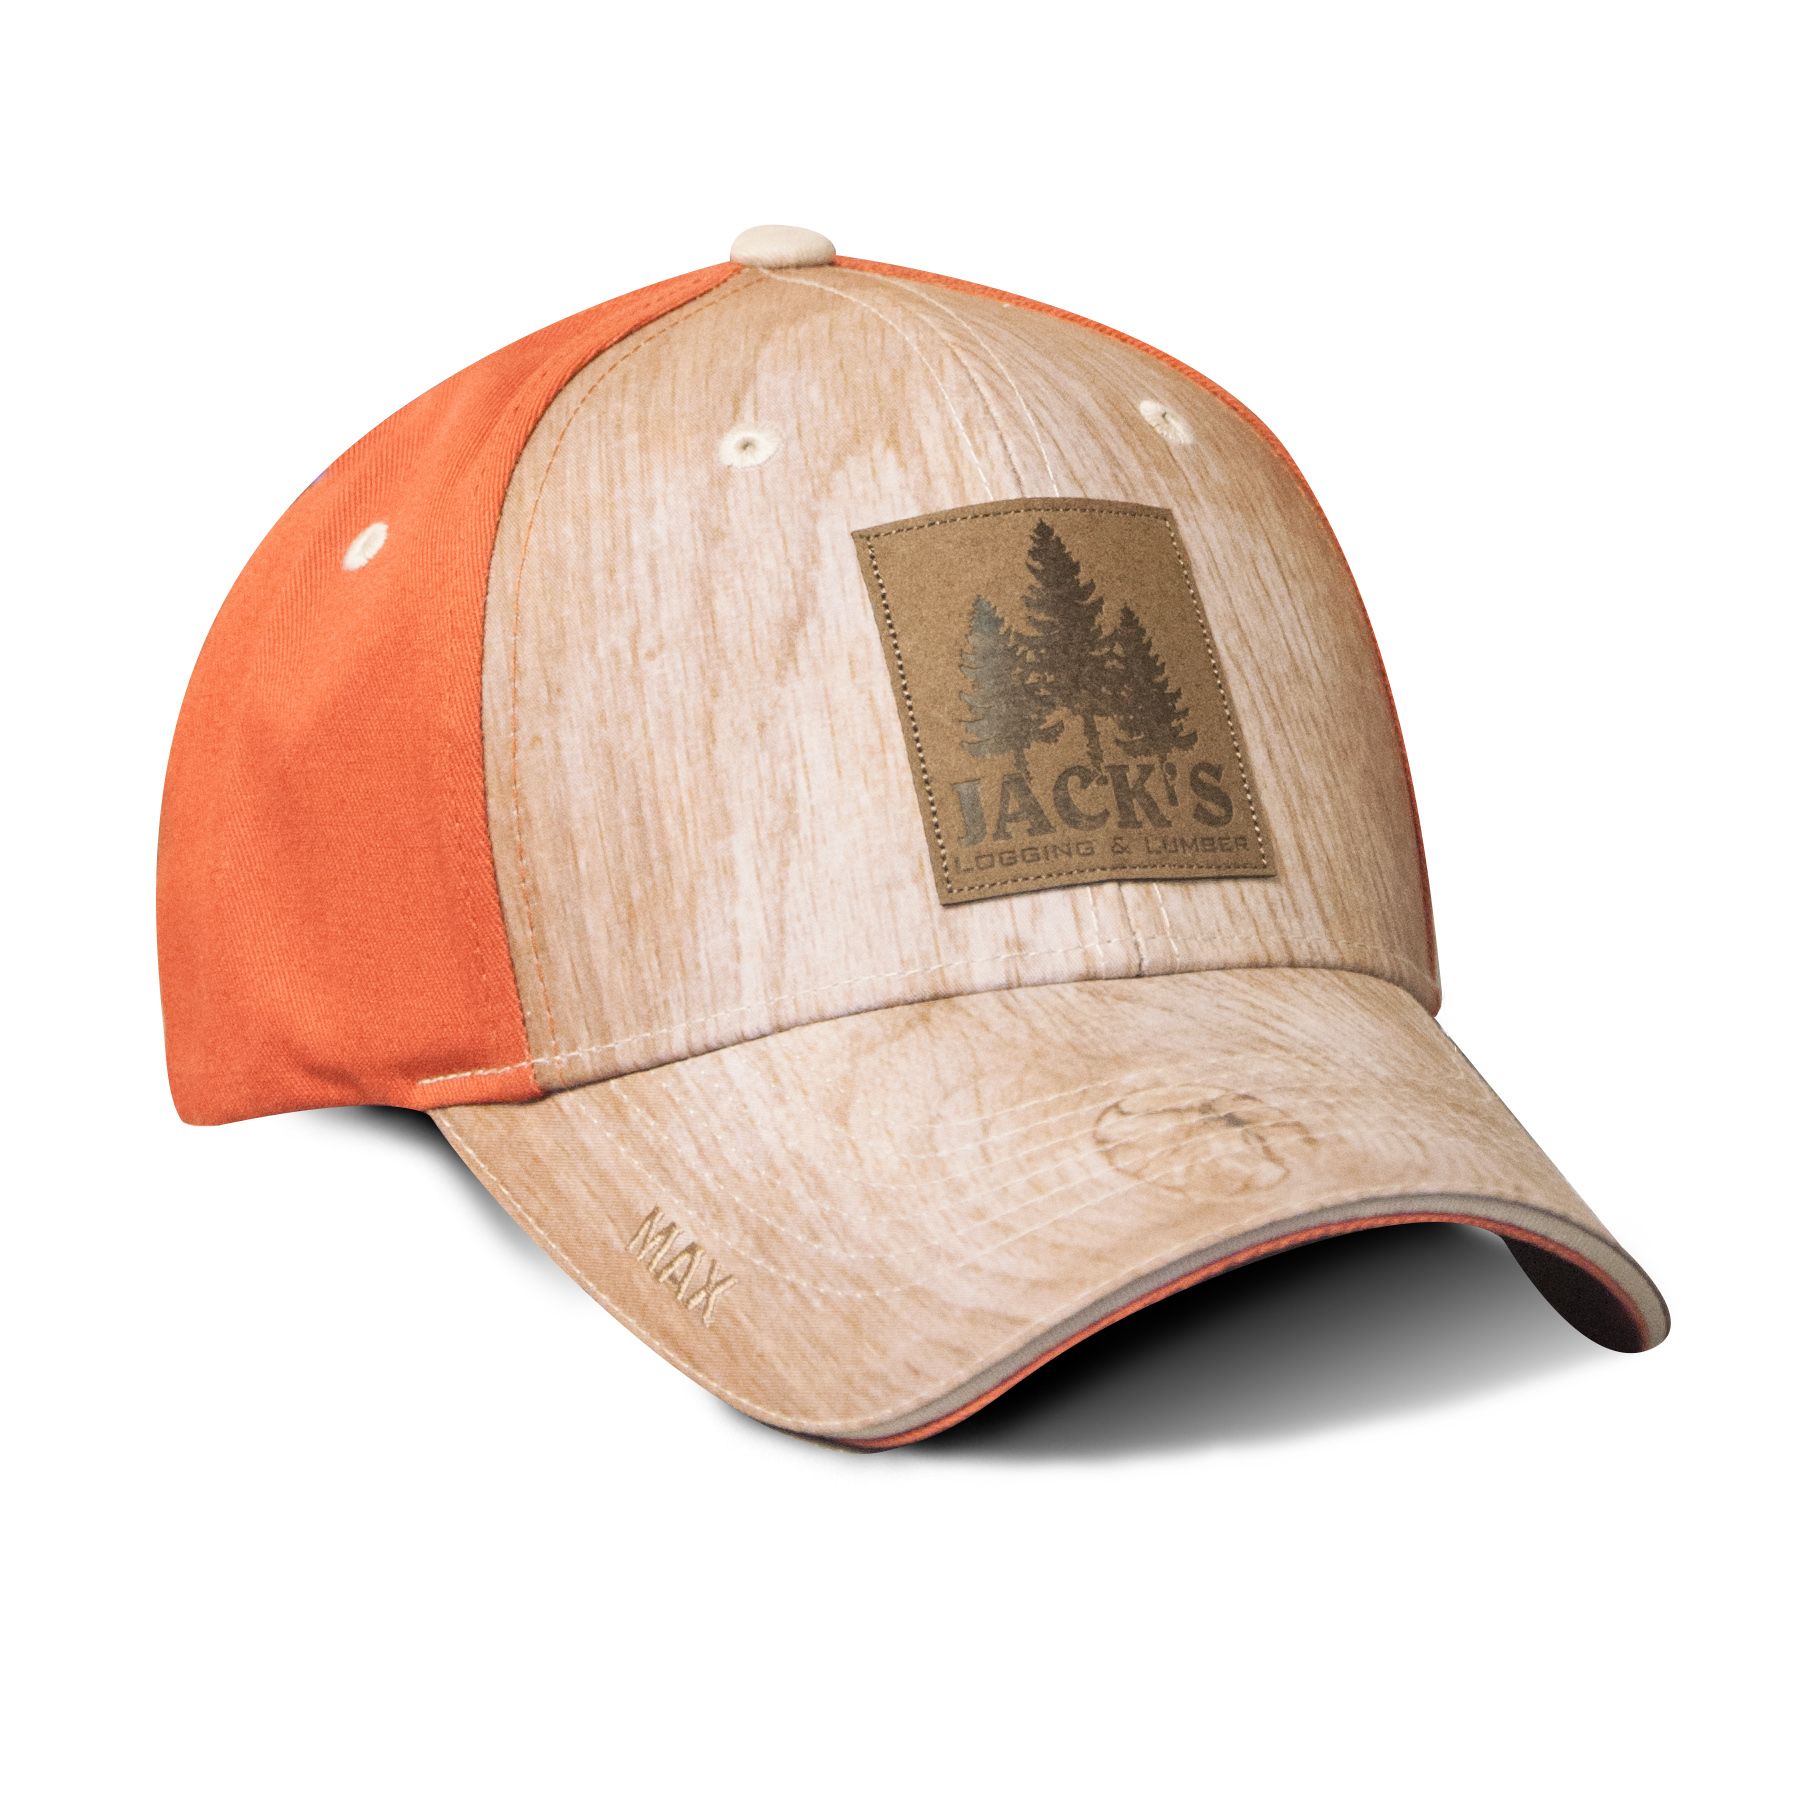 The Infusion Adult Unisex Wood Grain Max Cap 6 panel